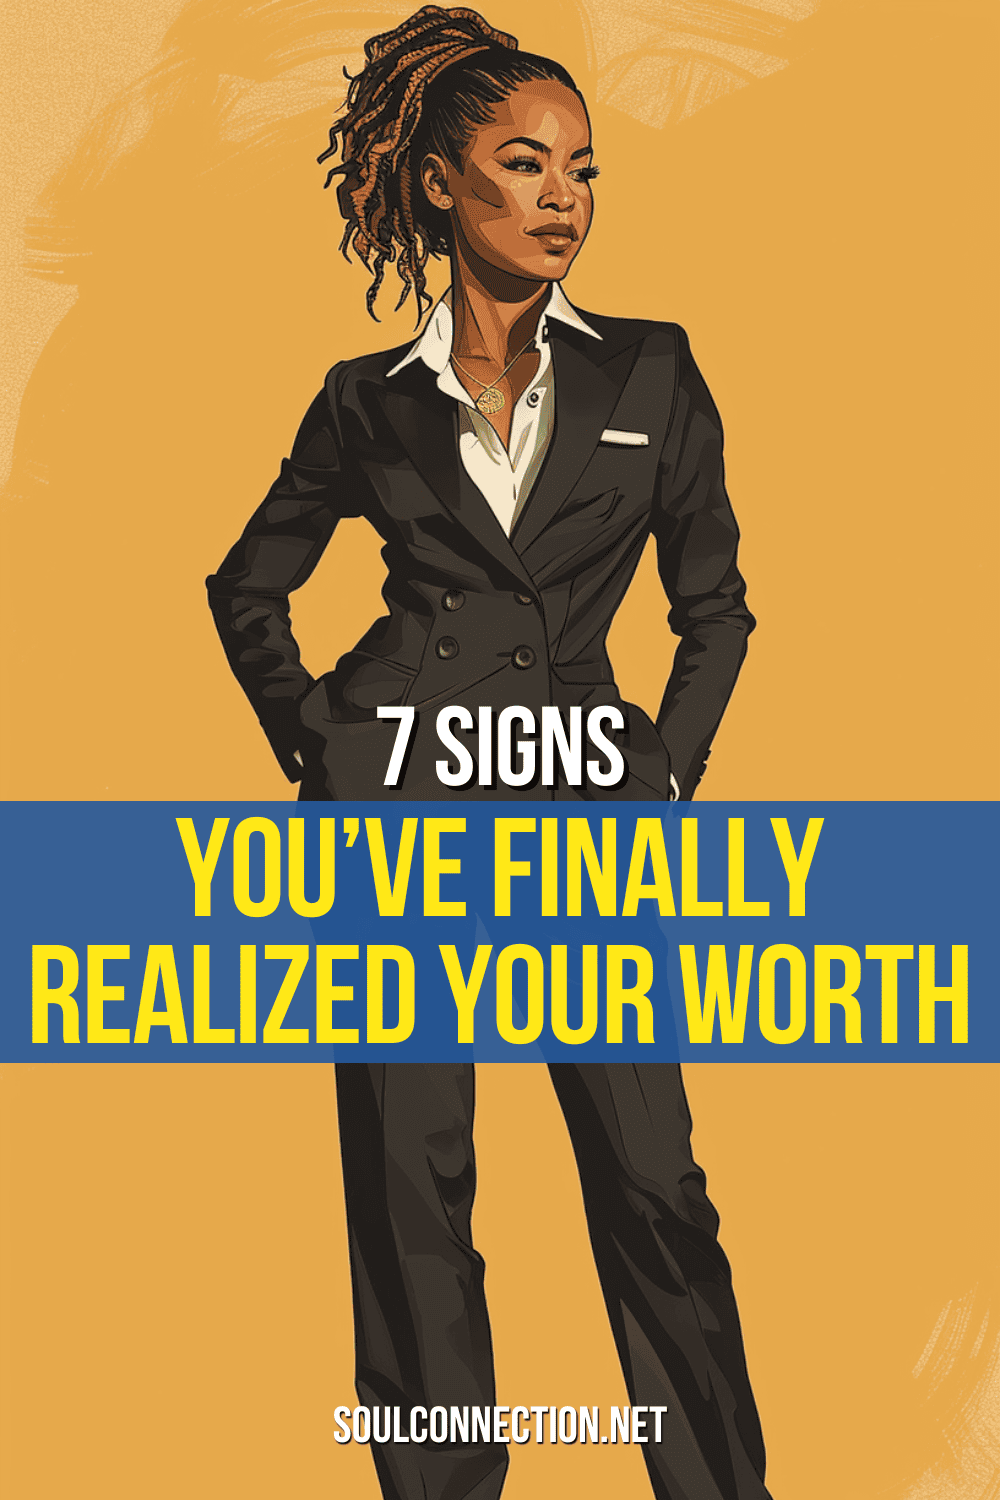 Illustration of a confident person in a suit with 7 Signs Youve Embraced Your True Self-Worth text.